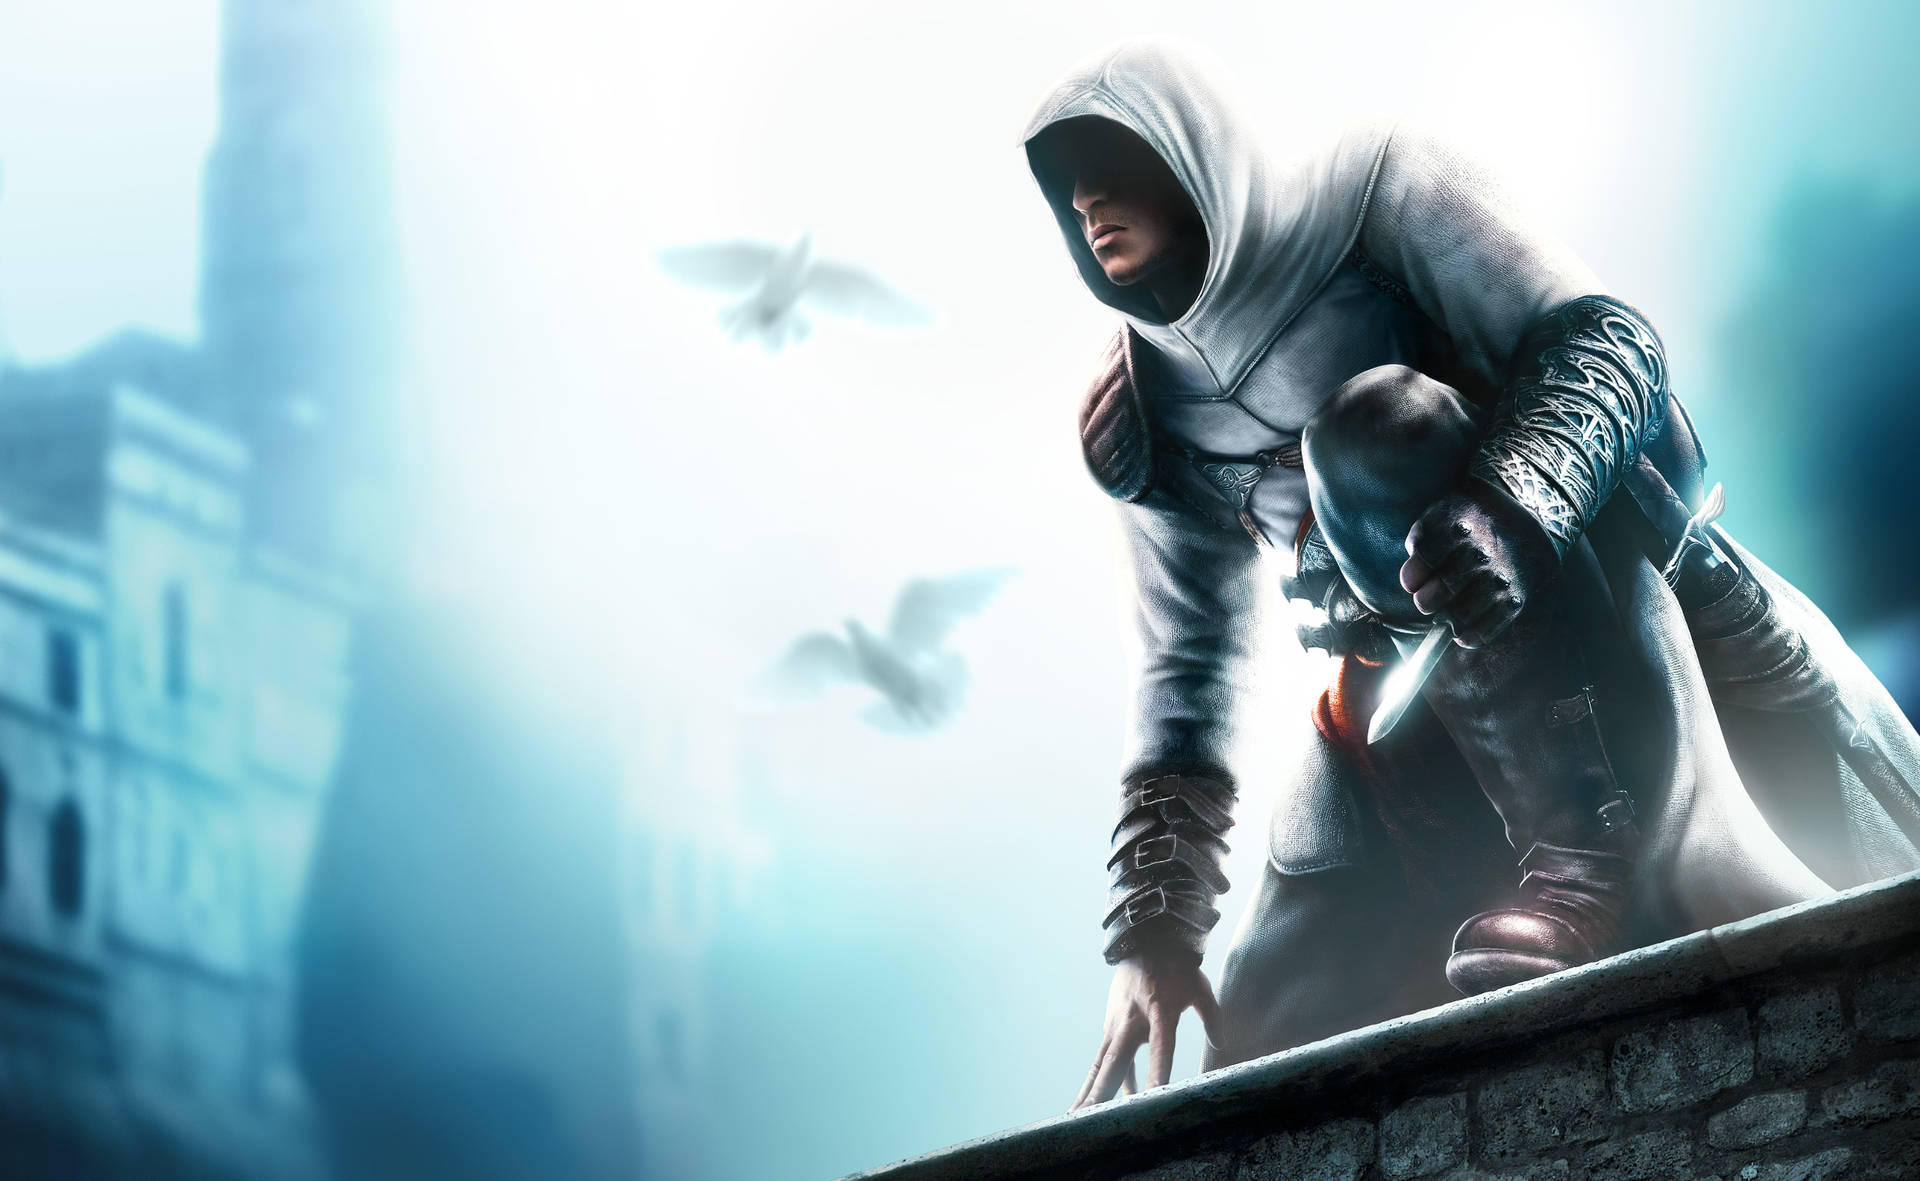 Assassin's Creed Protagonist Altair